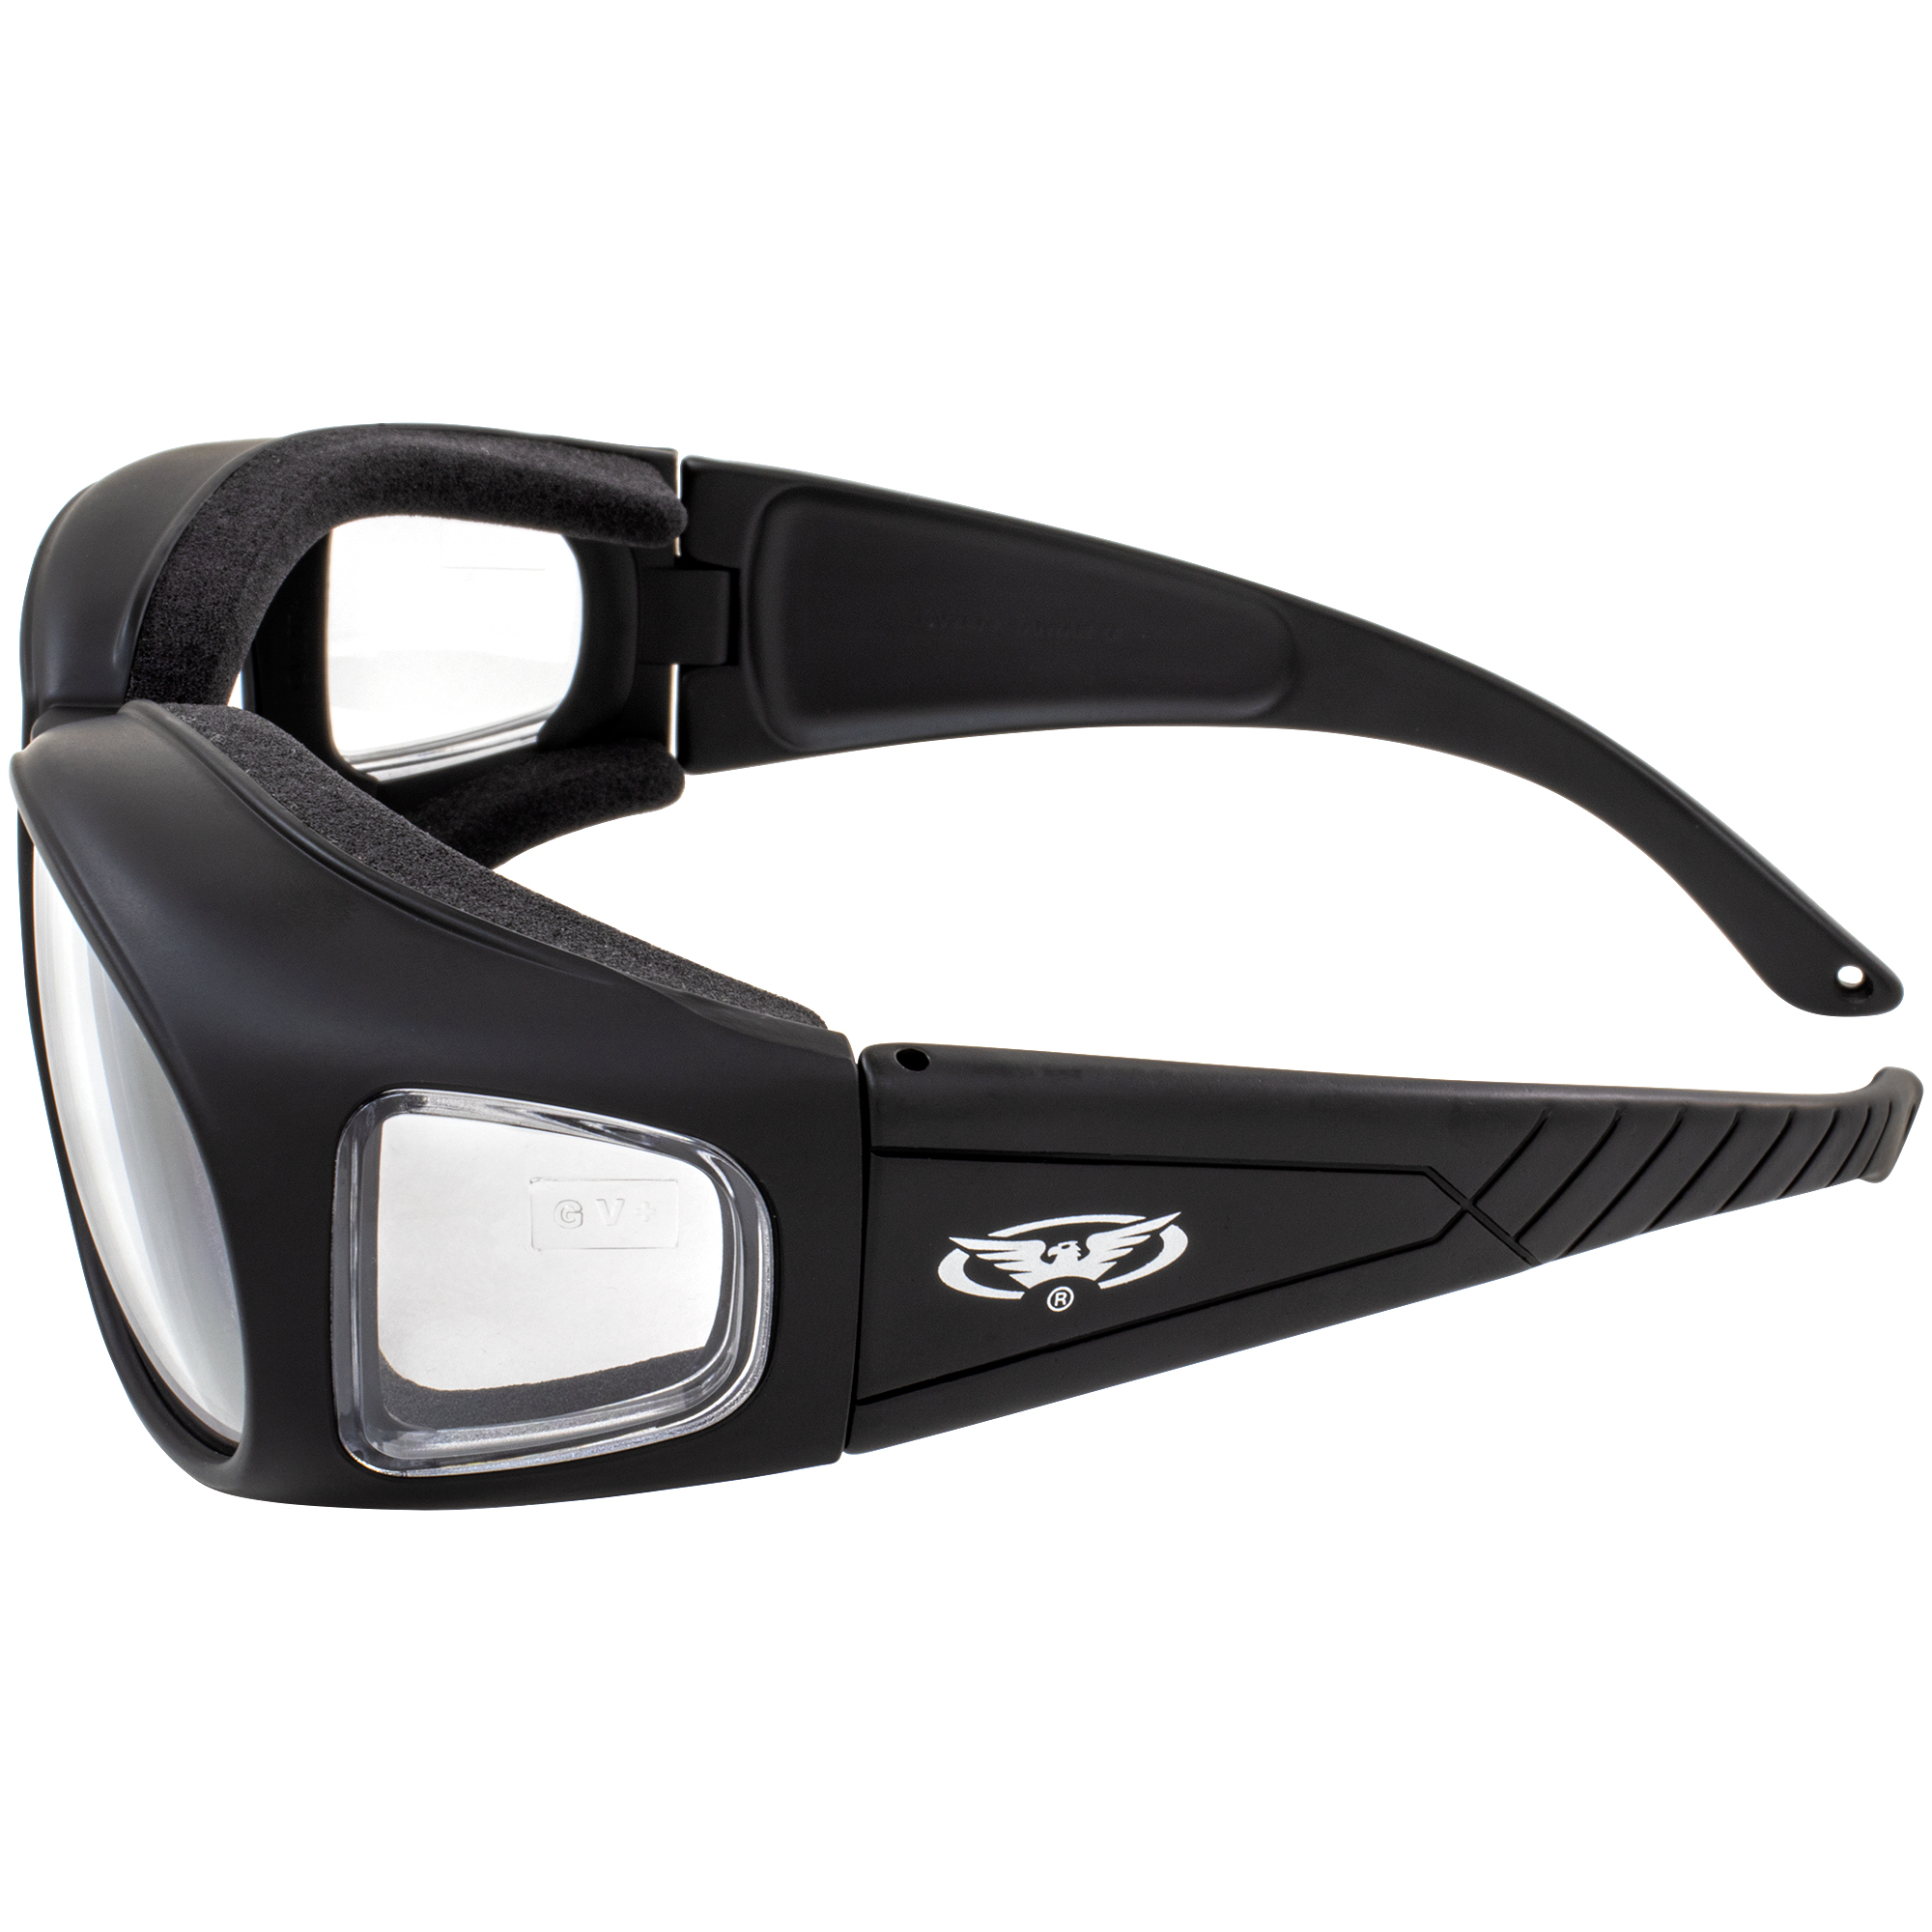 Three (3) Pairs Motorcycle Safety Sunglasses Fits Over Rx Glasses Smoke, Clear, and Yellow Day & Night & Gun Range! Usage Meets ANSI Z87.1 Standards - image 3 of 7